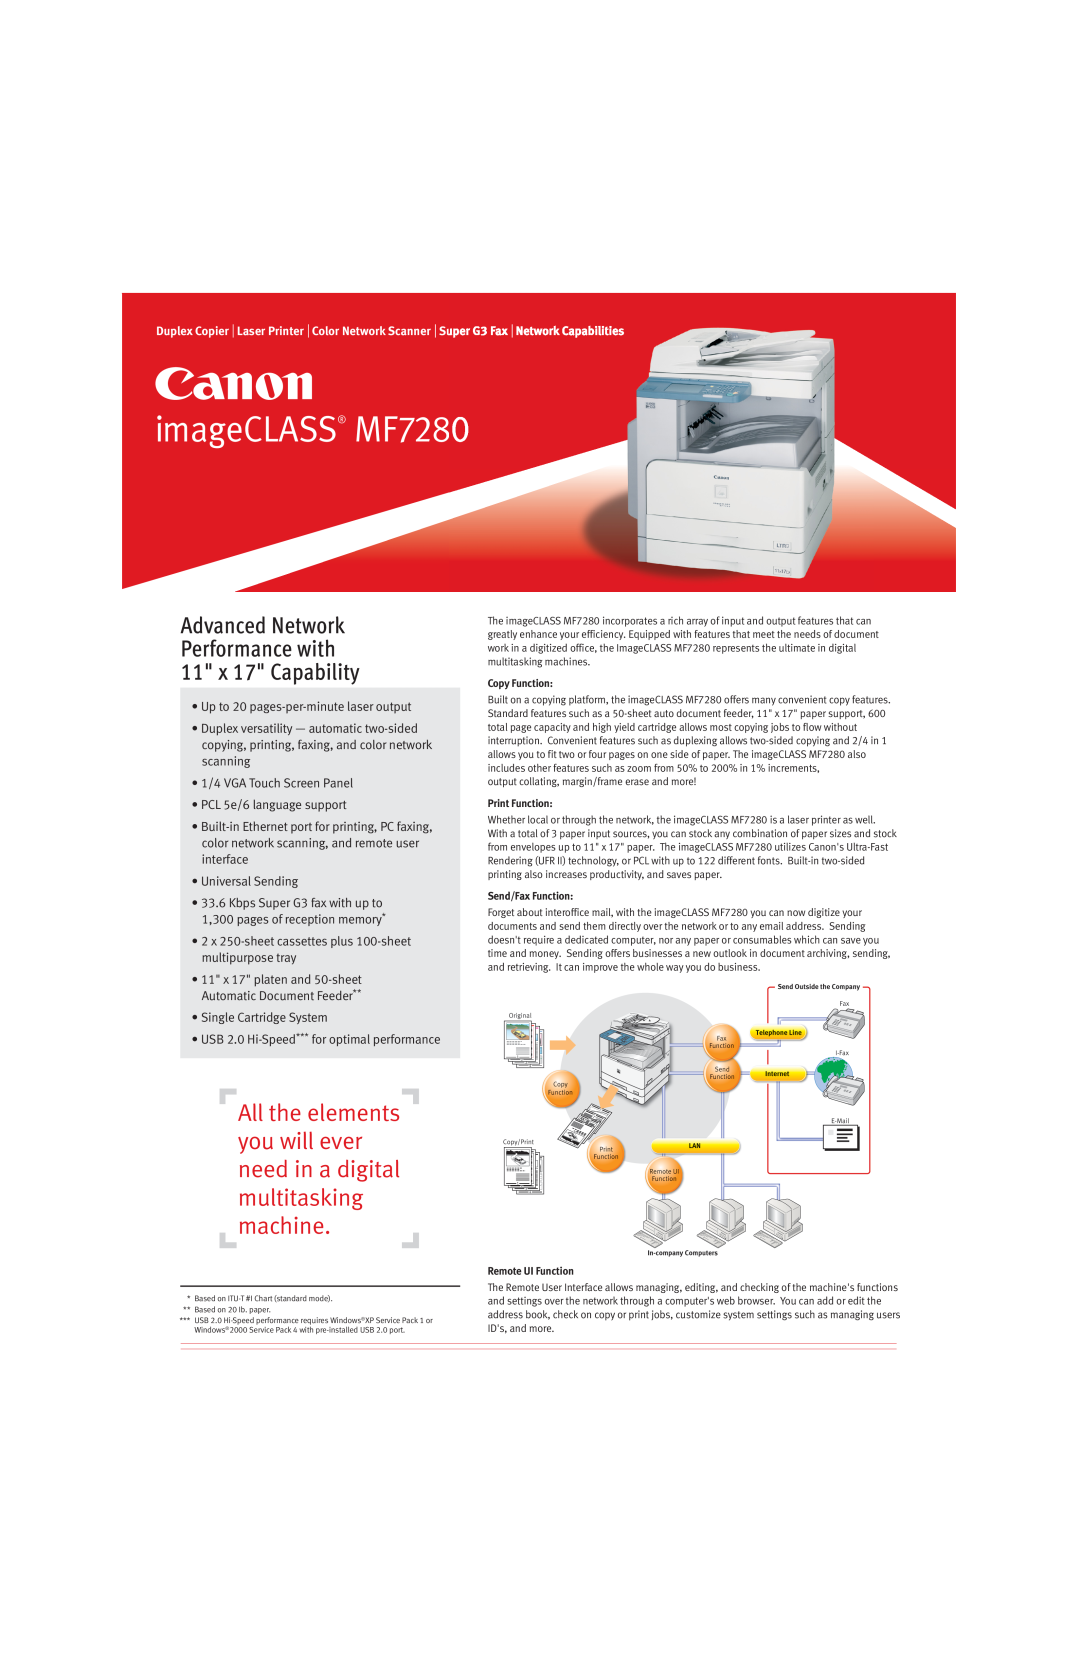 Canon manual imageCLASS MF7280, All the elements you will ever need in a digital multitasking machine, Copy Function 